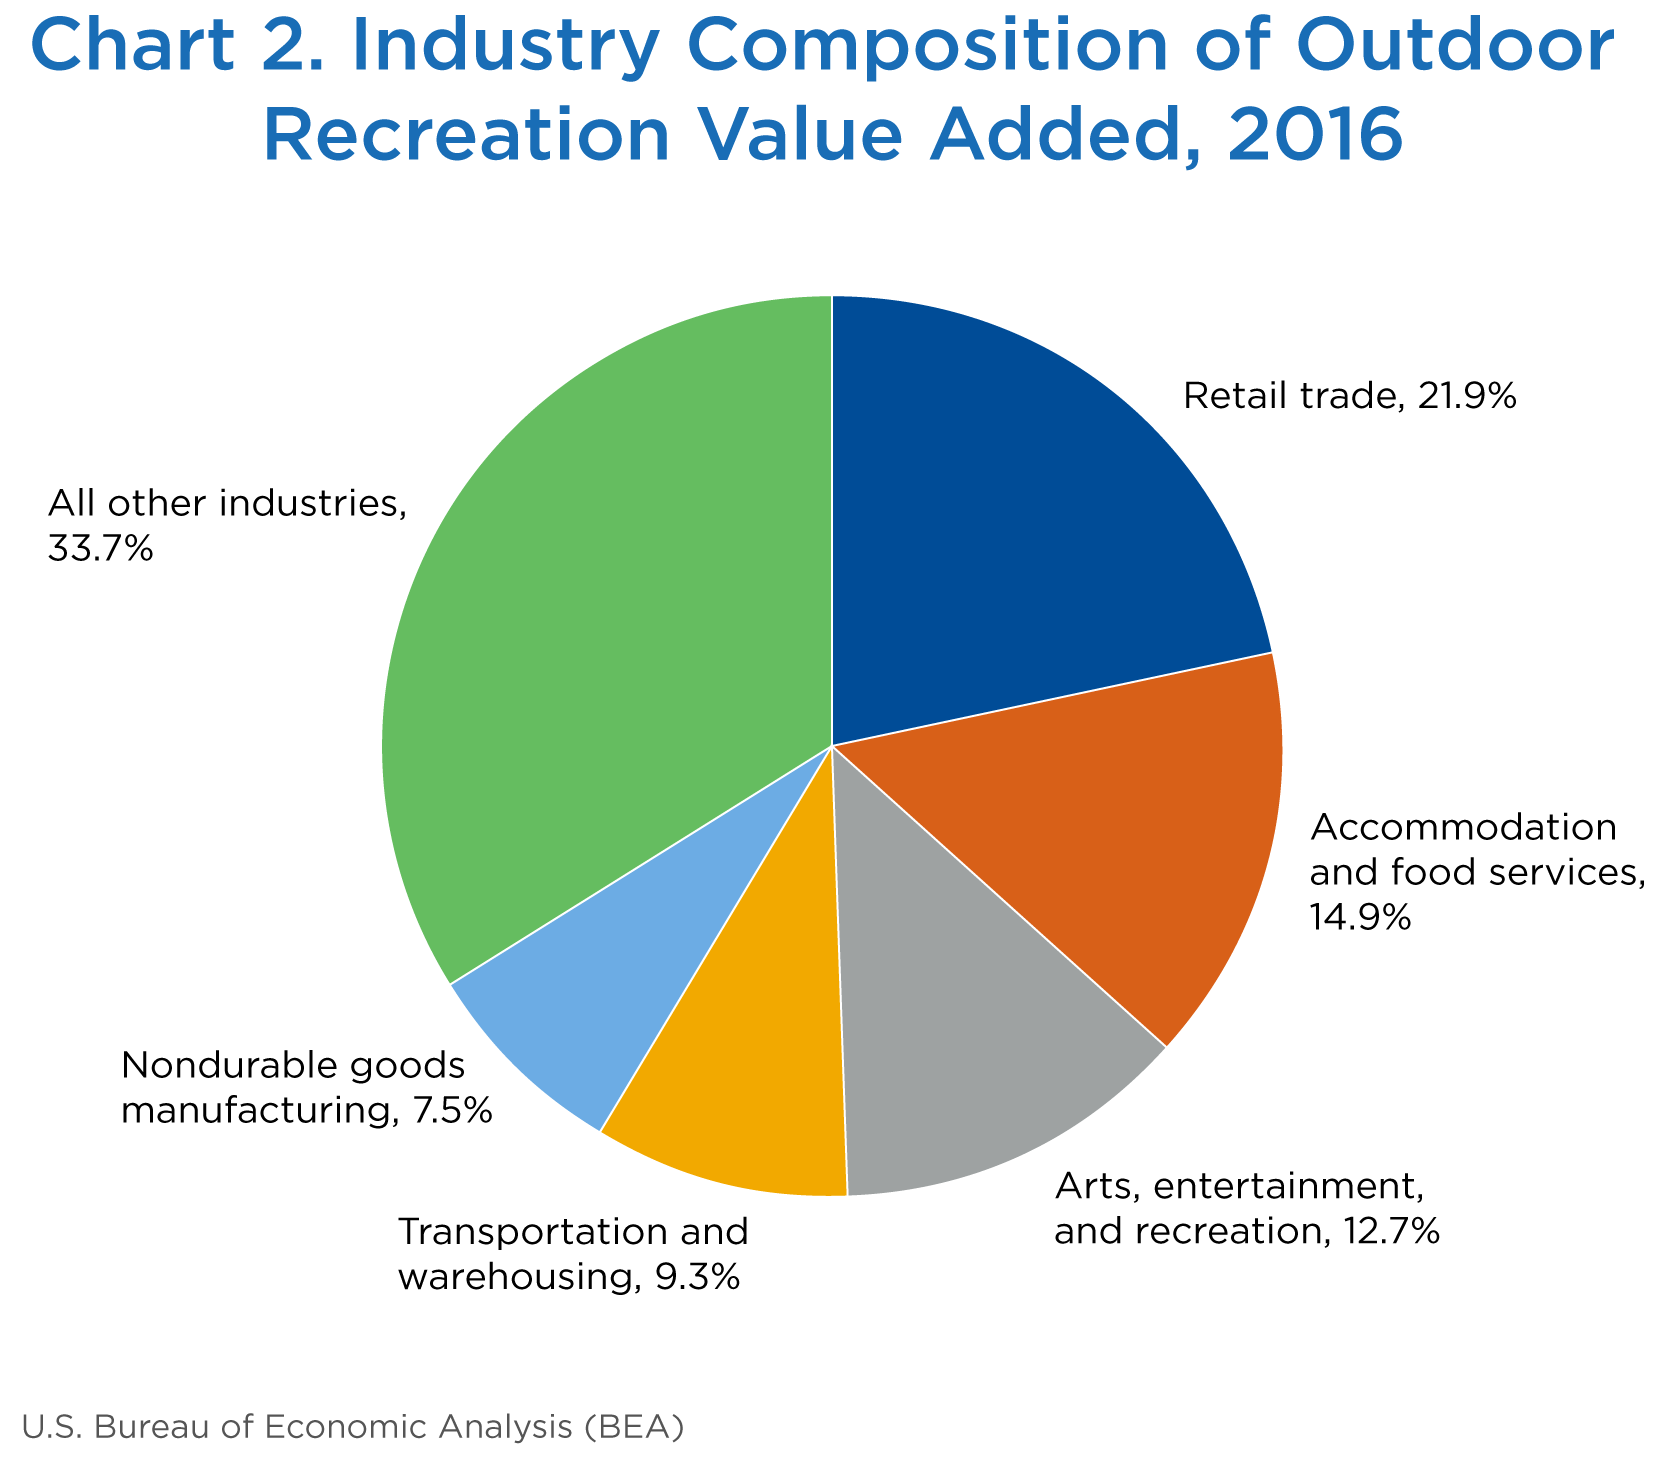 Chart 2. Industry Composition of Outdoor Recreation Value Added, 2016, Pie Chart